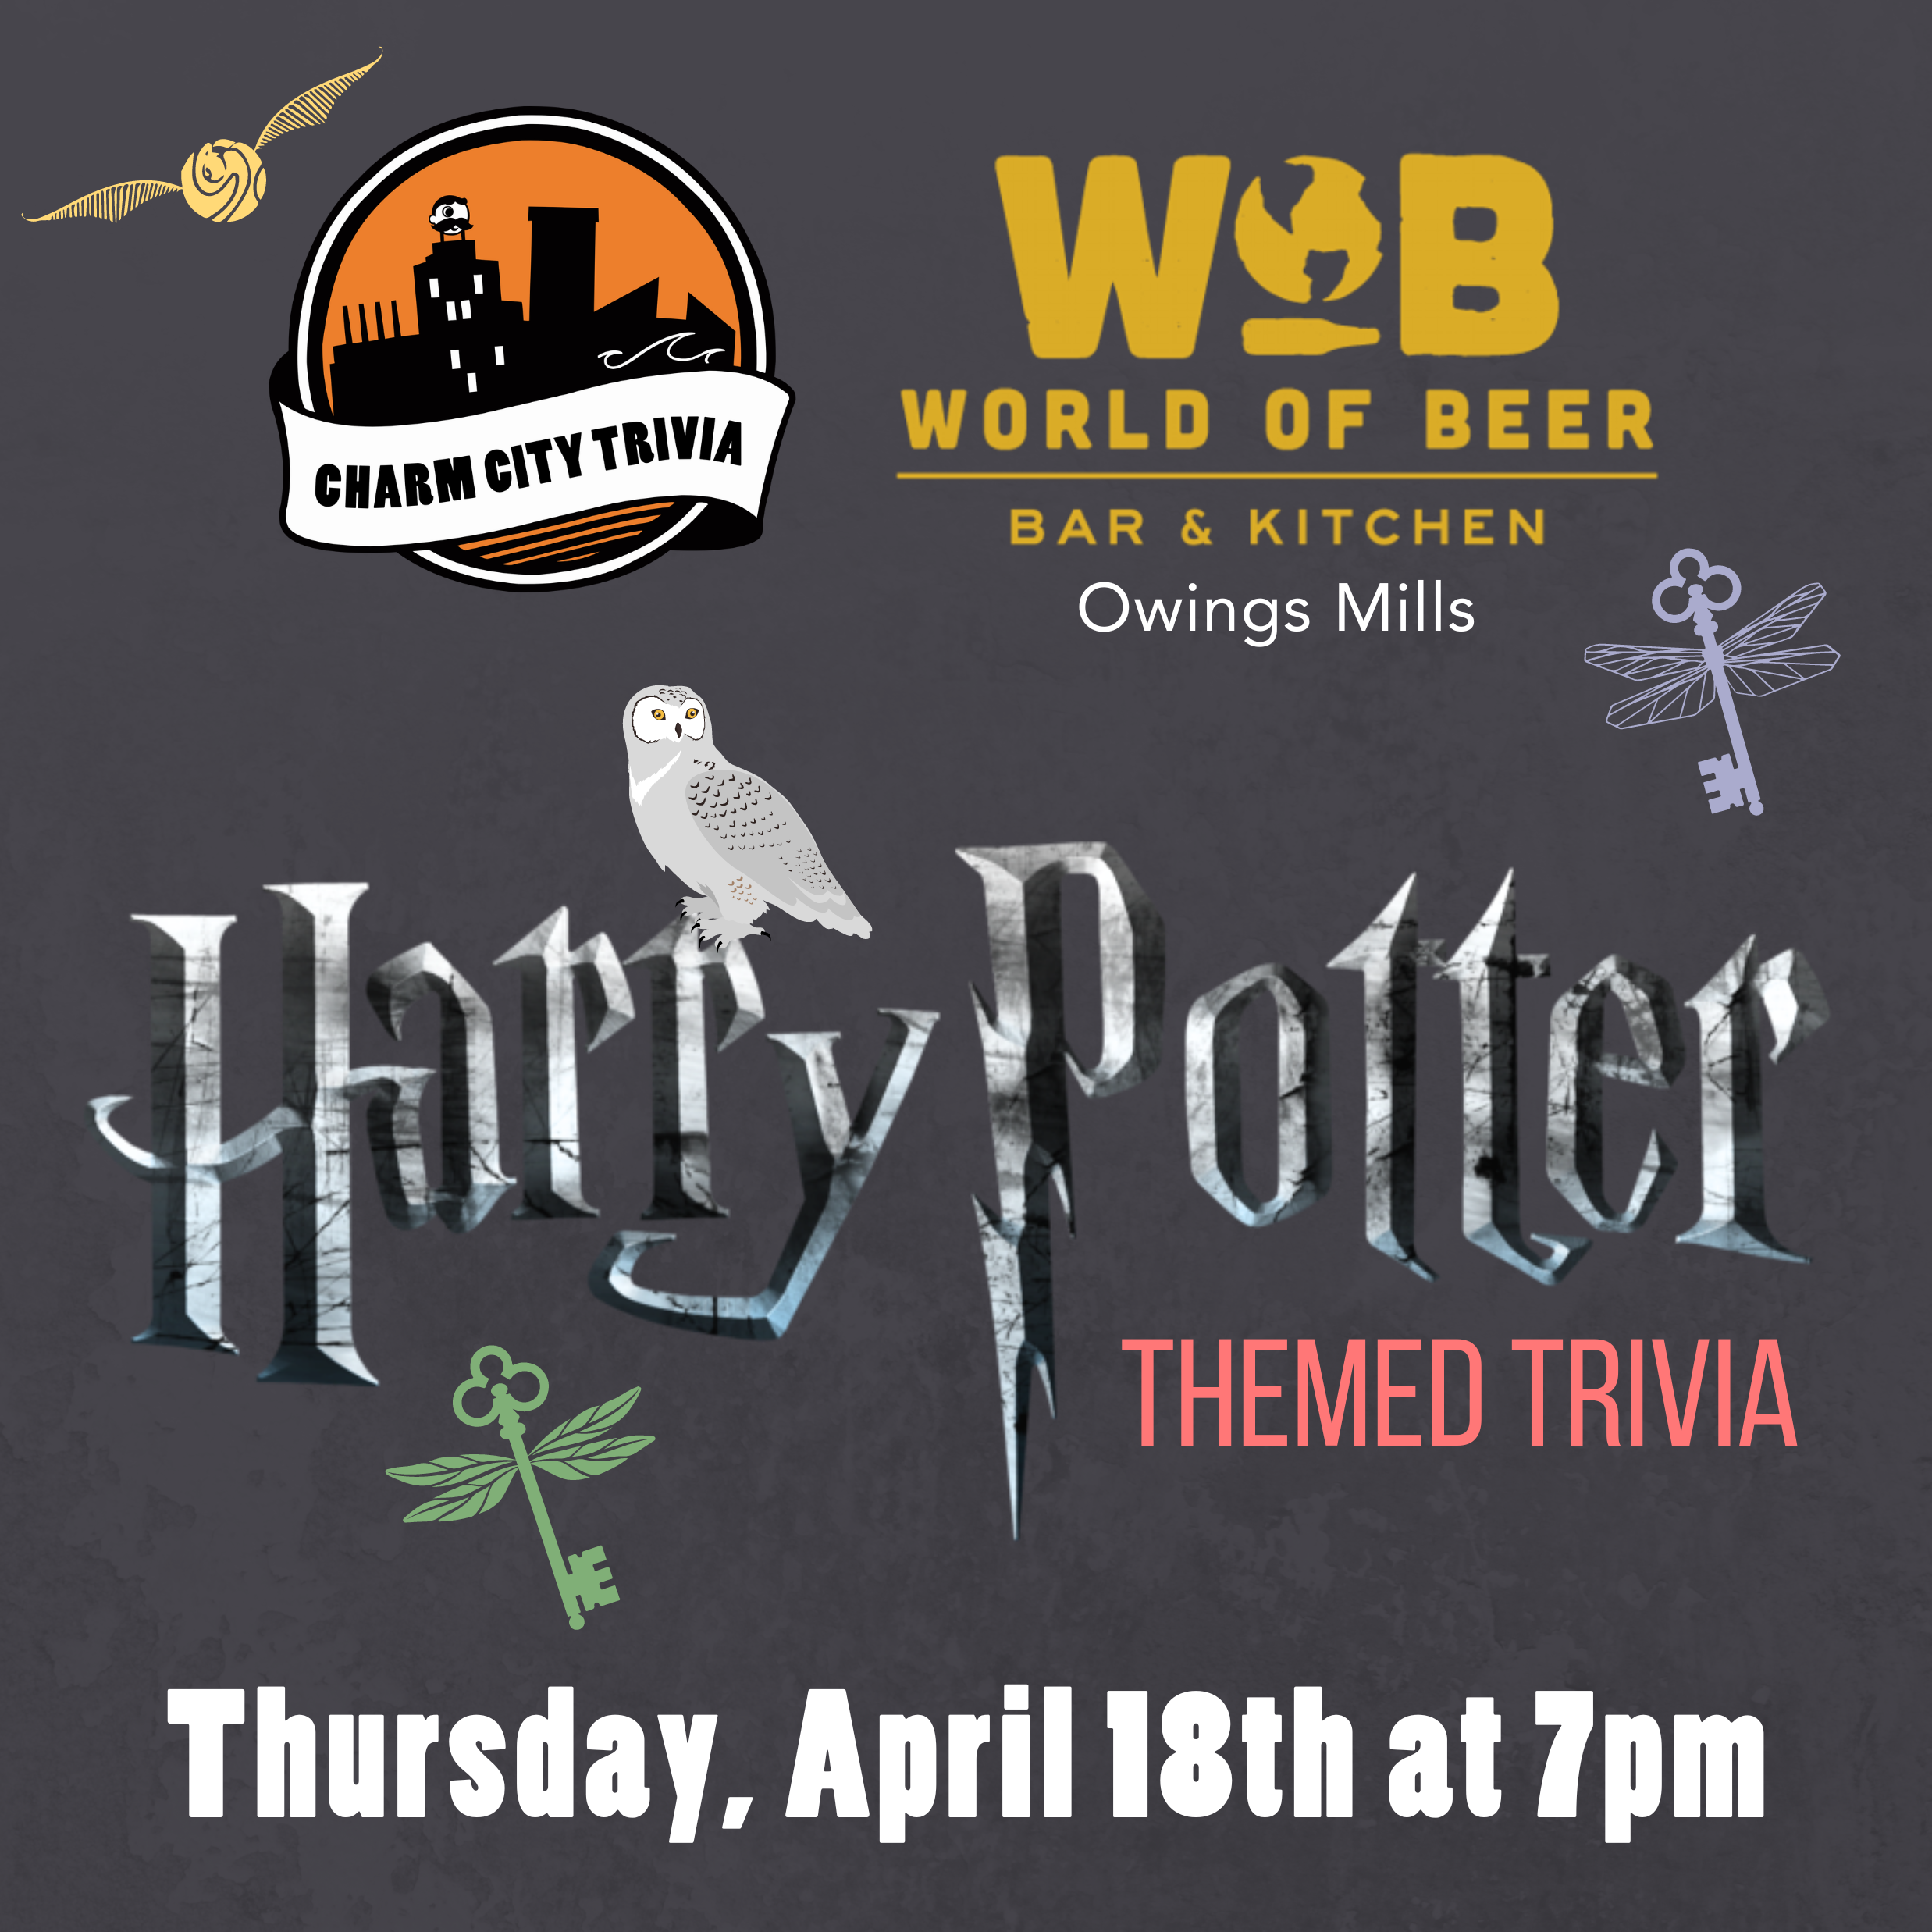 a medium gray background with the charm city trivia logo, world of beer owings mills logo, harry potter logo, a light green and a light blue flying key, a golden snitch, hedwig, and white text. the text reads: thursday, april 18th at 7pm